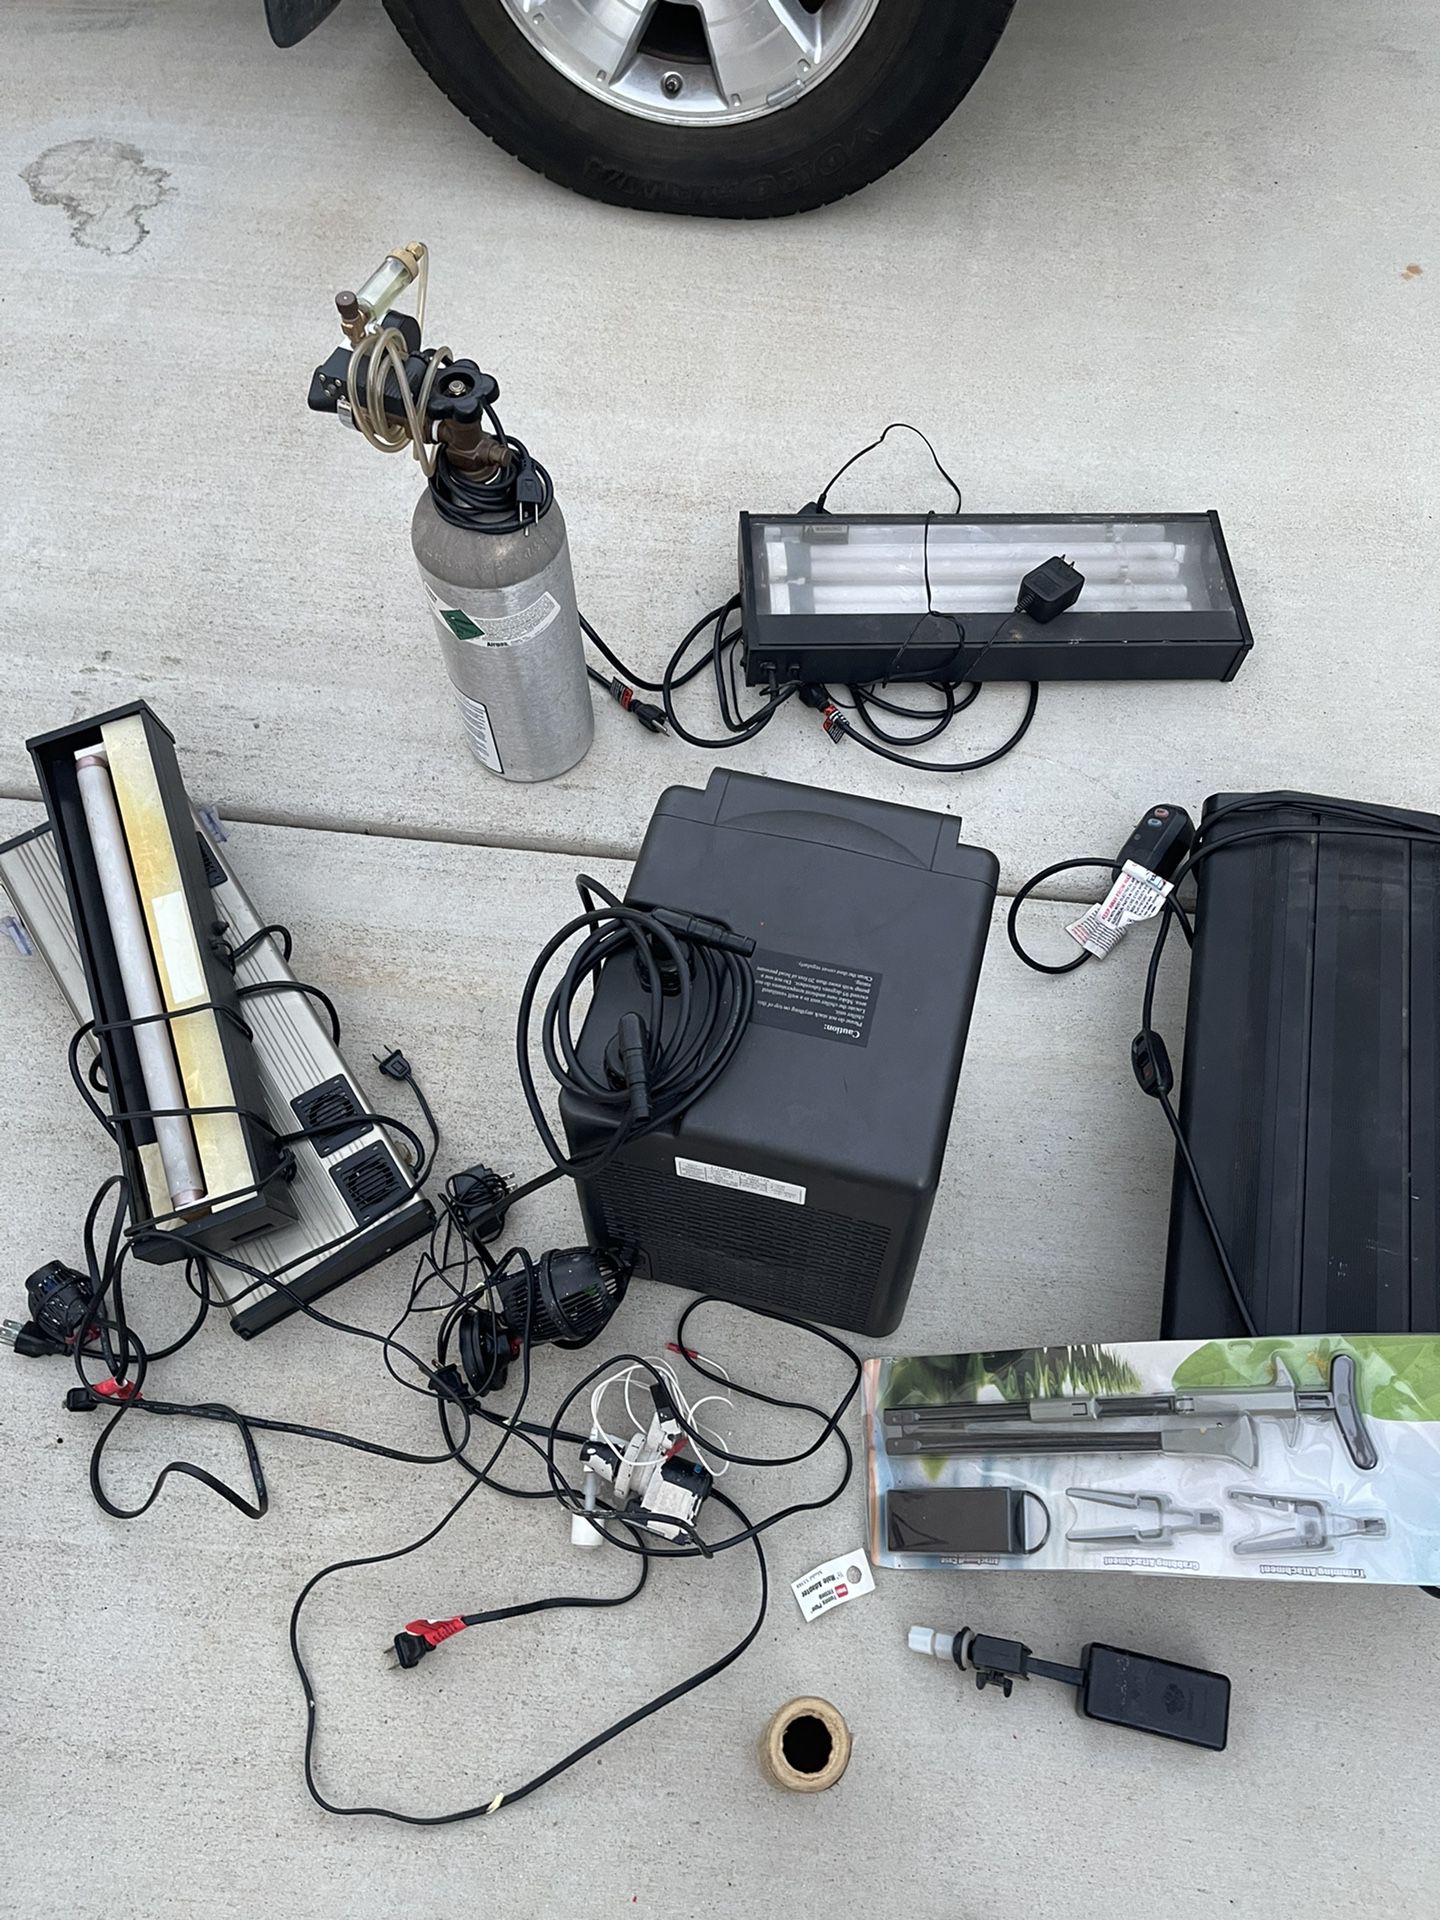 Reef Planted Tanks Supplies, pH Controller, Chiller, Metal Halide, Power Compact